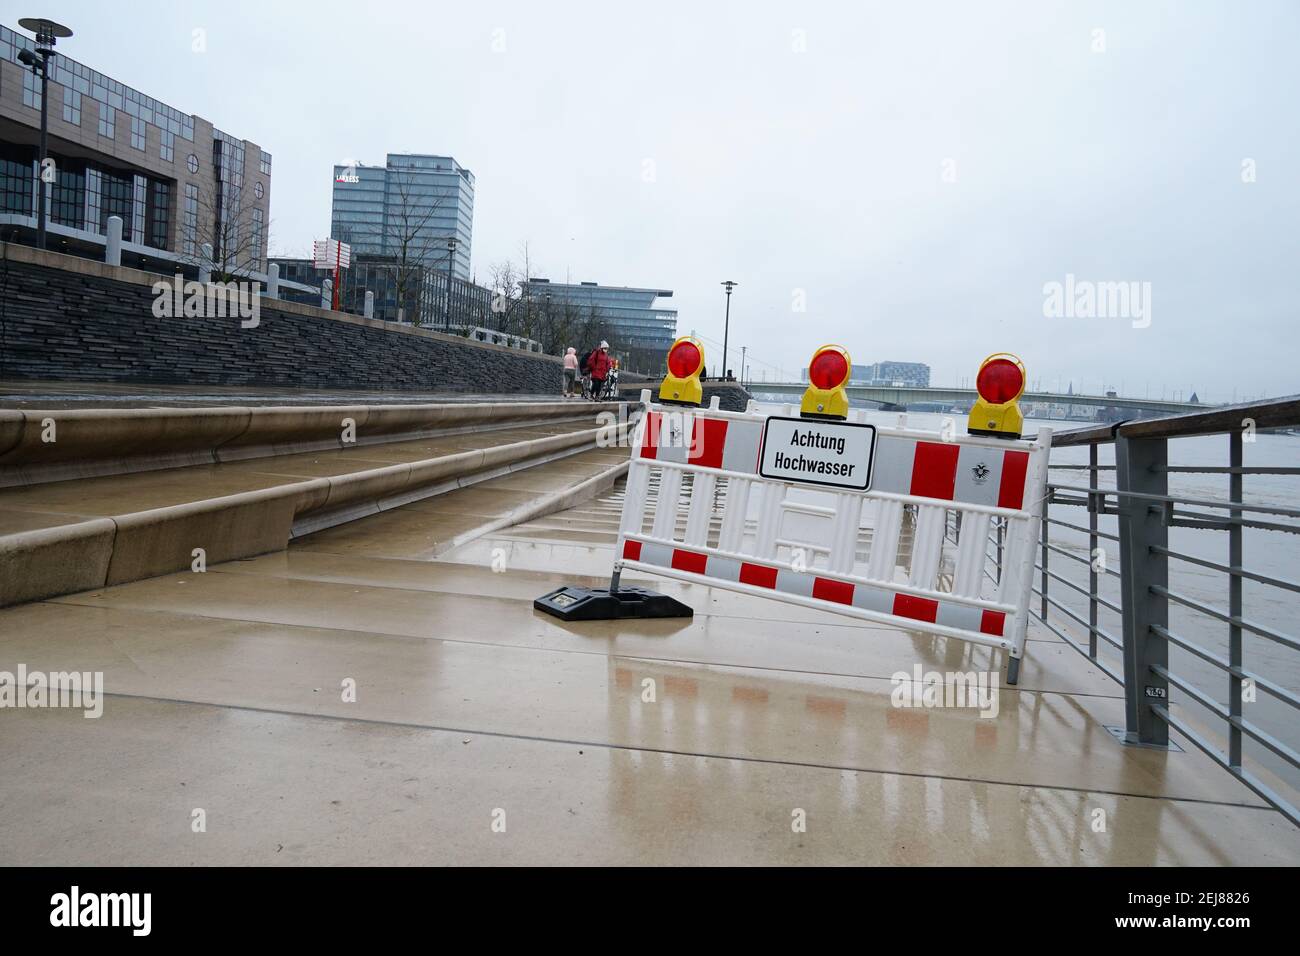 'Achtung Hochwasser - attention high tidewater' sign near the River Rhine in Cologne, Germany Stock Photo